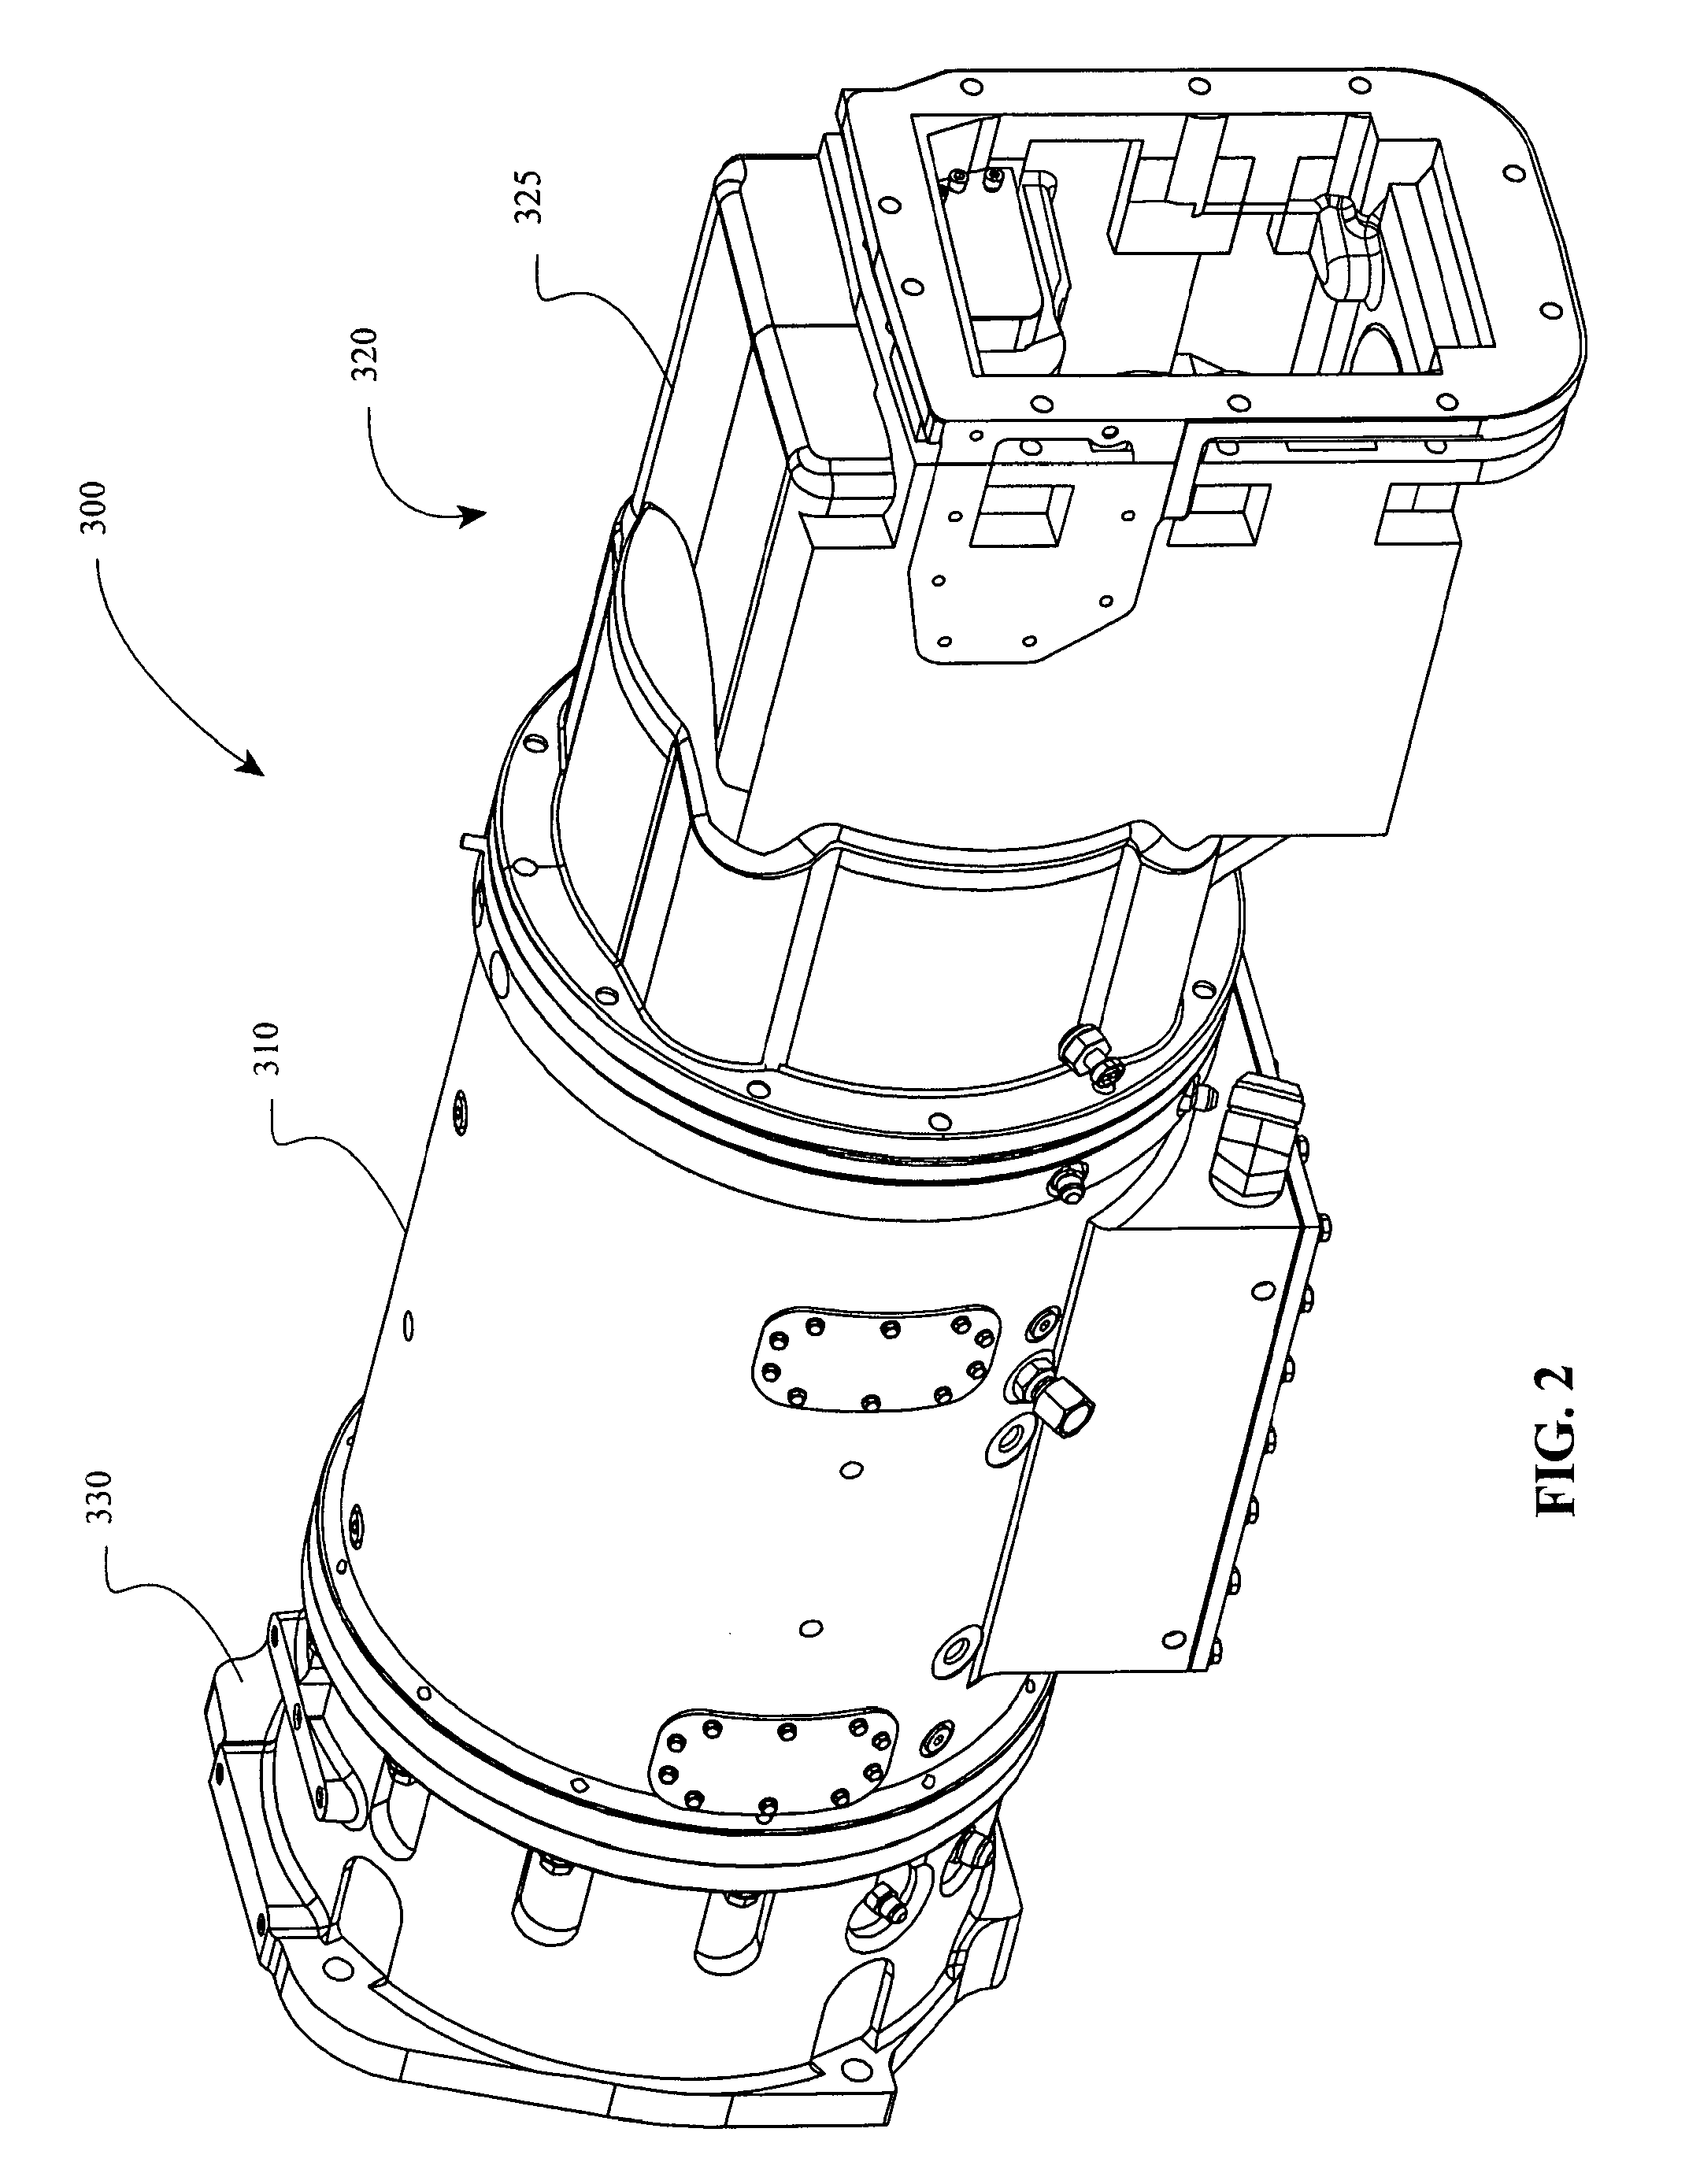 Infinitely variable transmissions, continuously variable transmissions, methods, assemblies, subassemblies, and components therefor